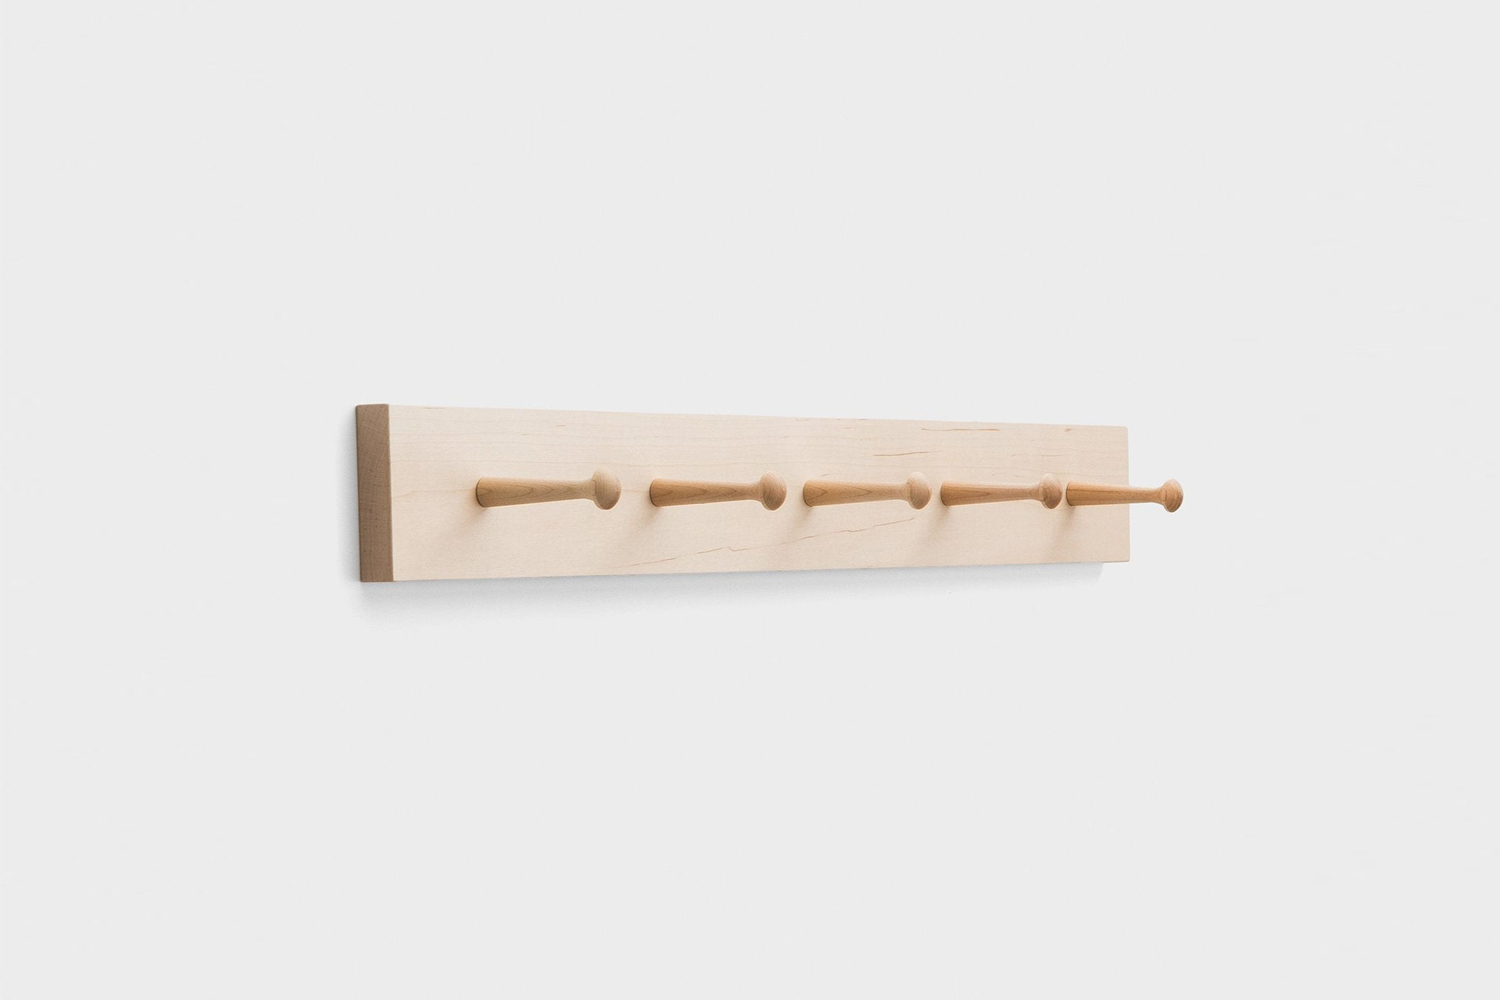 the maple peg rail features five pegs; \$84 at schoolhouse. another option is t 17